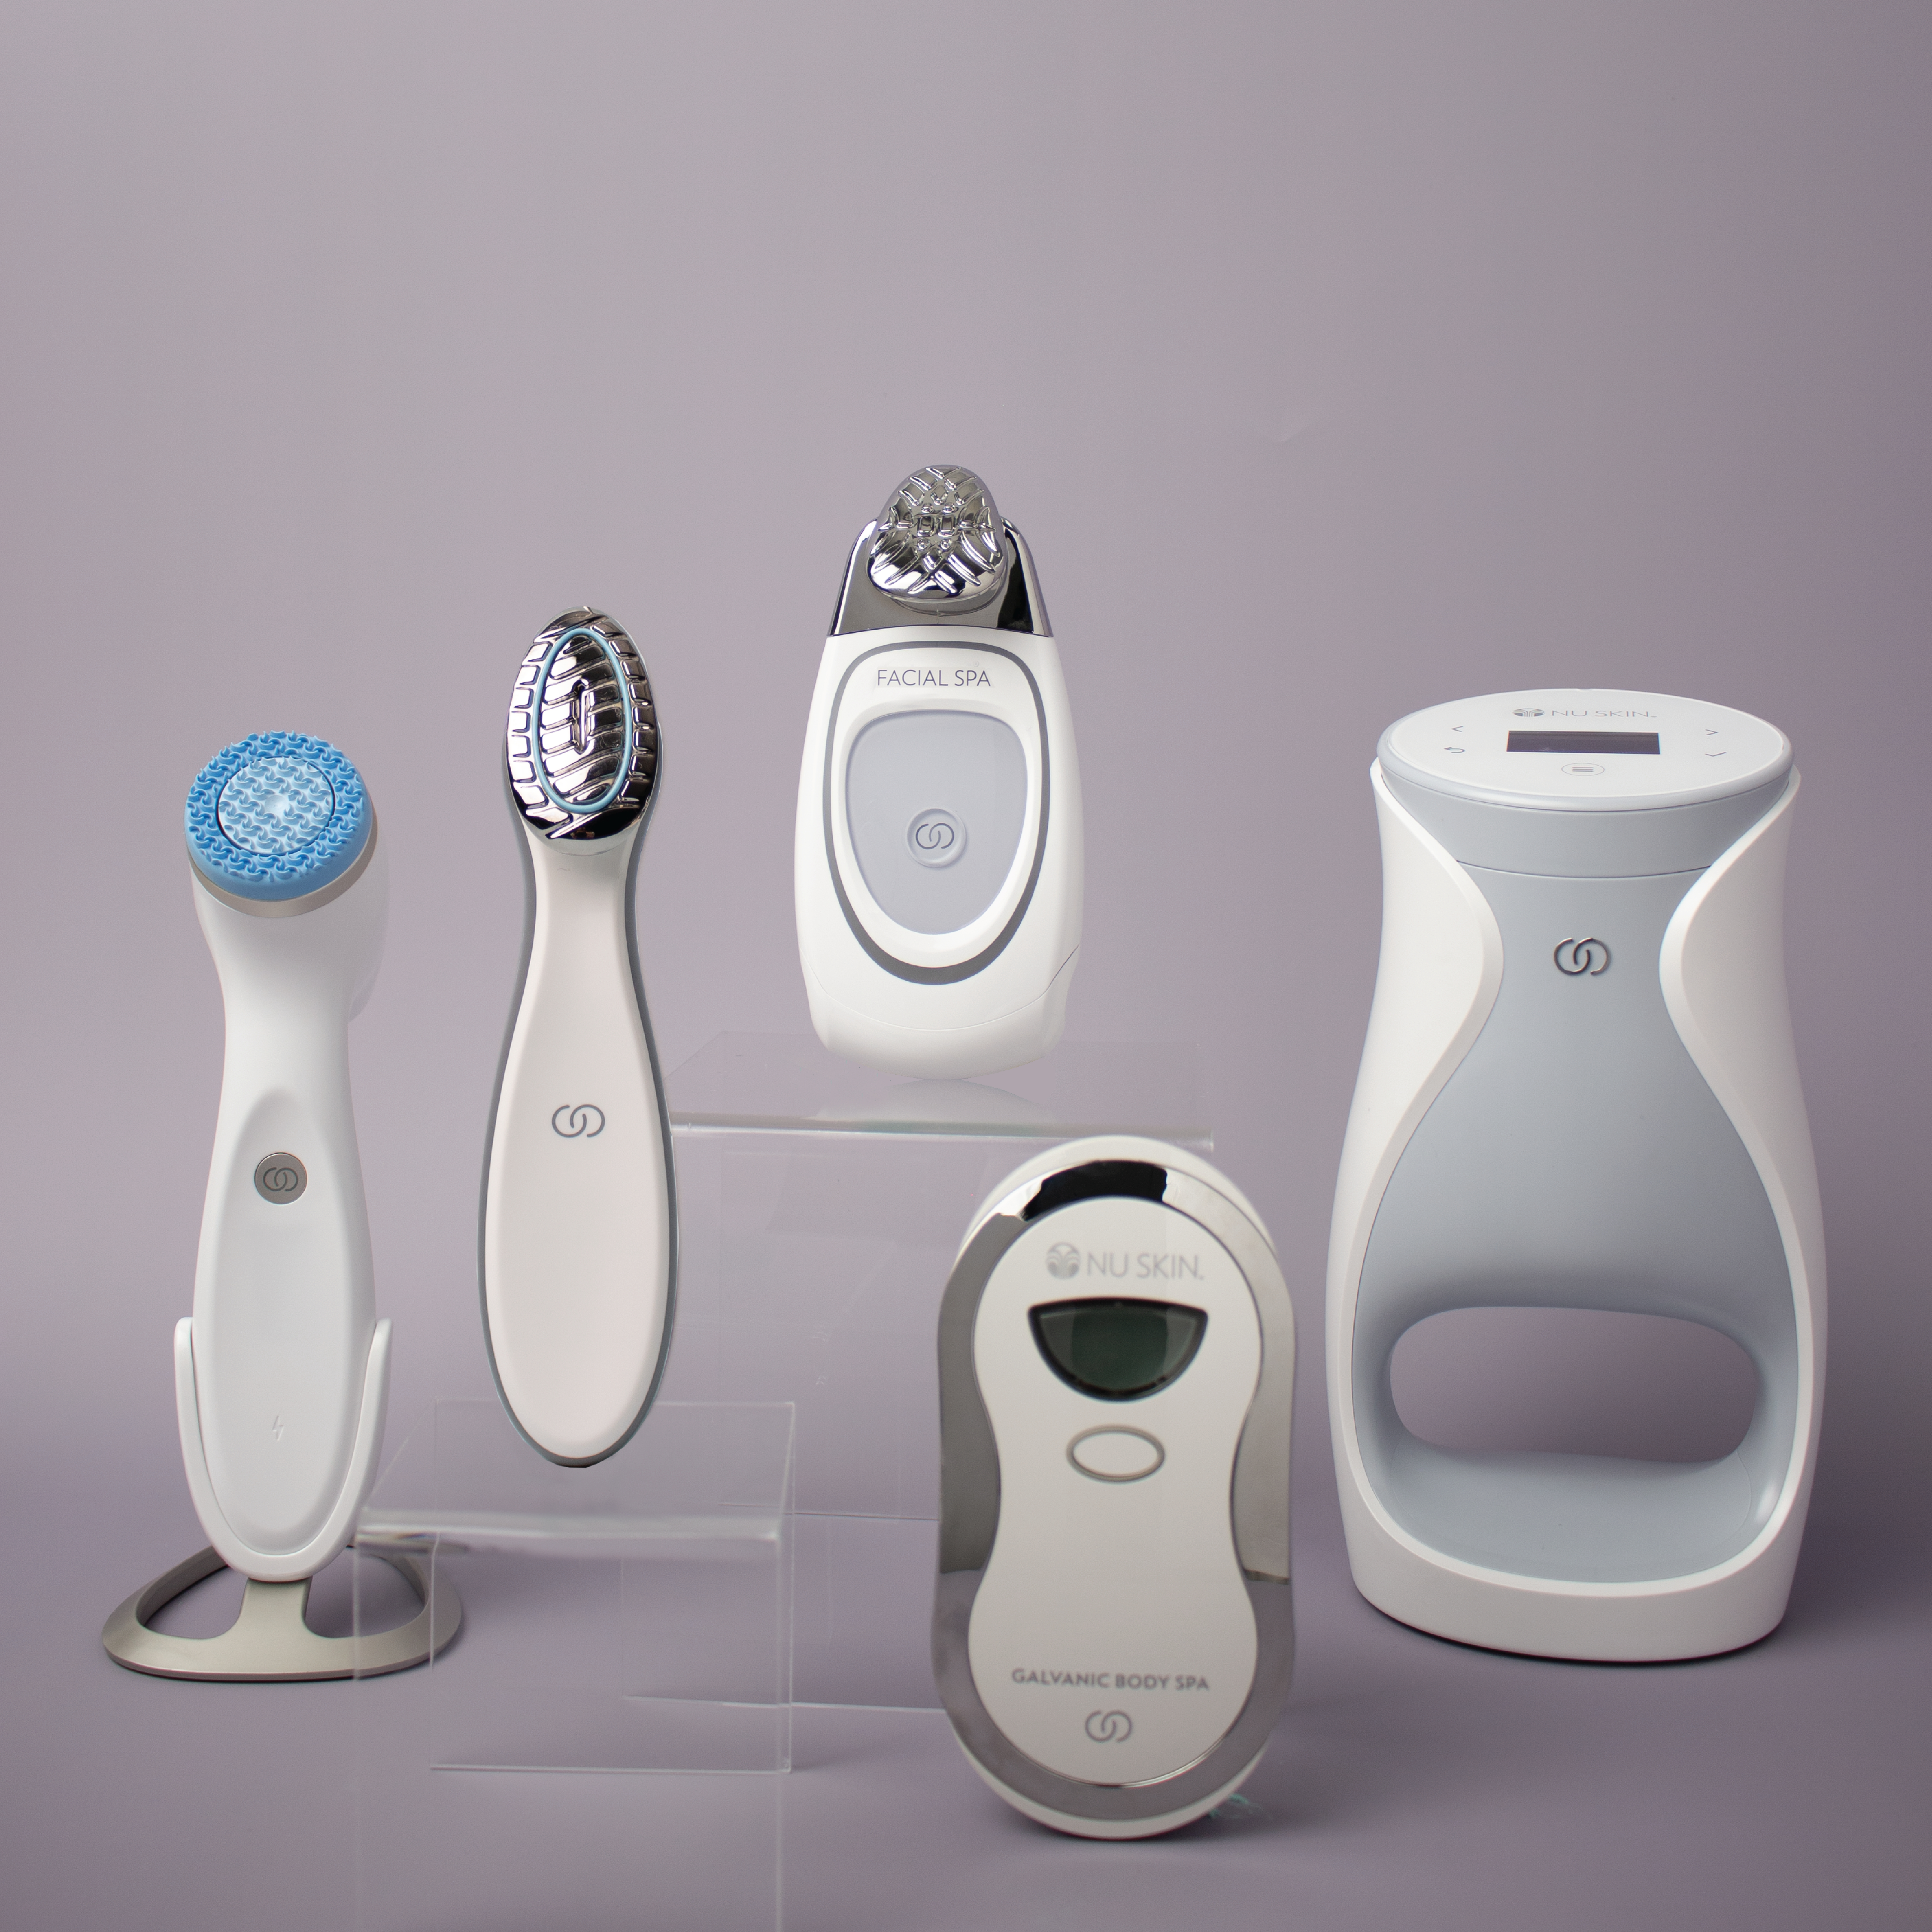 Nu Skin Ranked the World's #1 Brand for Beauty Device Systems for